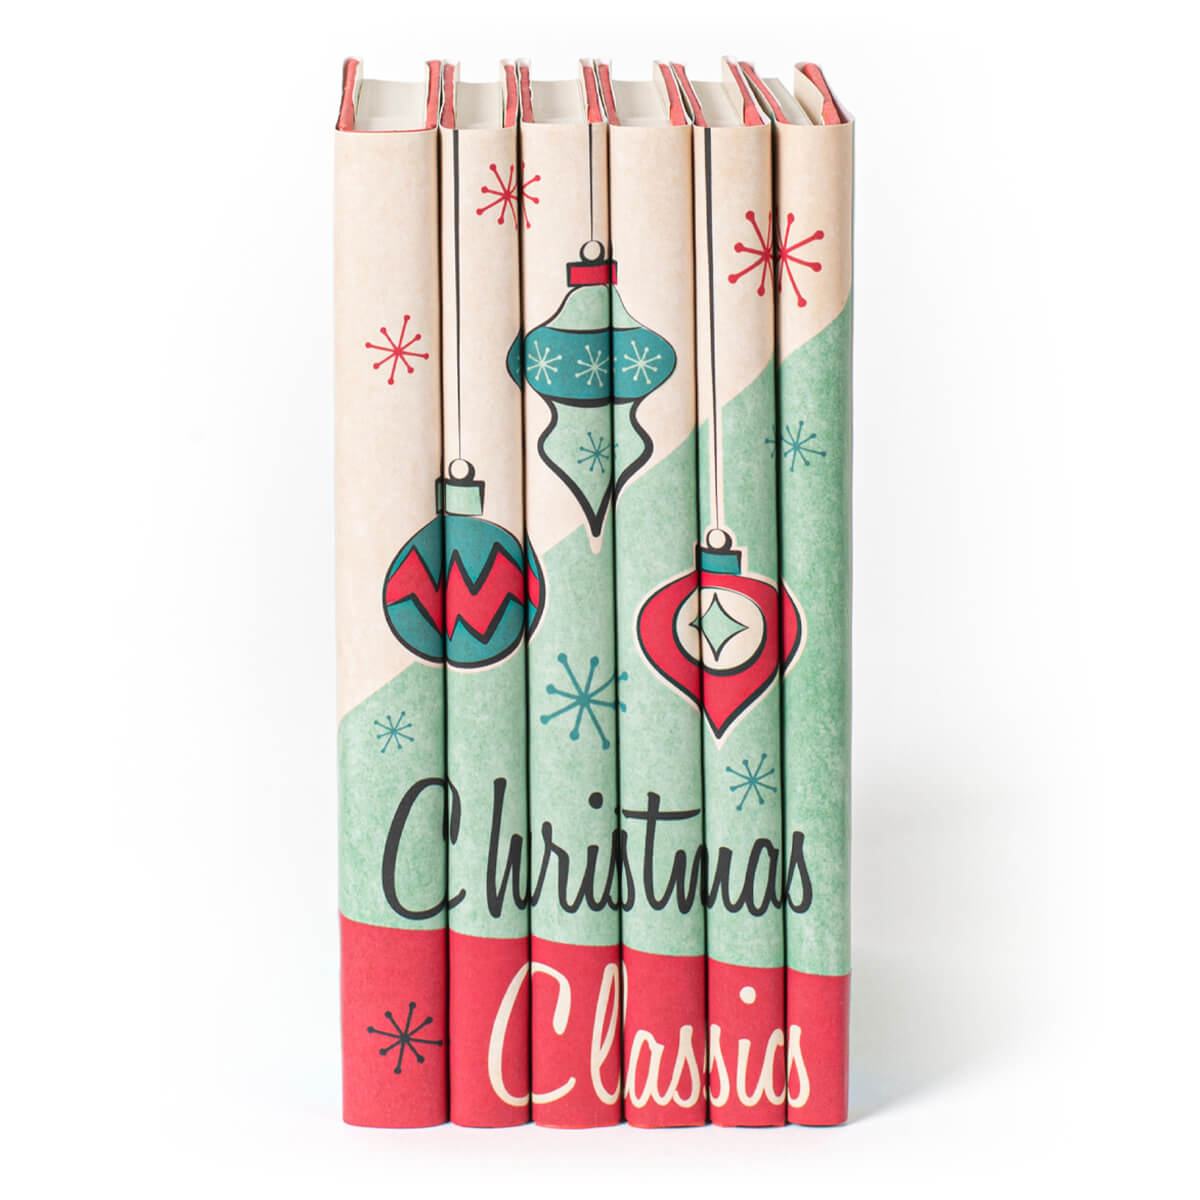 This festive set of novels is the perfect way to celebrate your favorite year-end traditions. Book Set, gift, trade, Christmas shopping. Retro Red, white, green cover with three illustrated ornaments. 